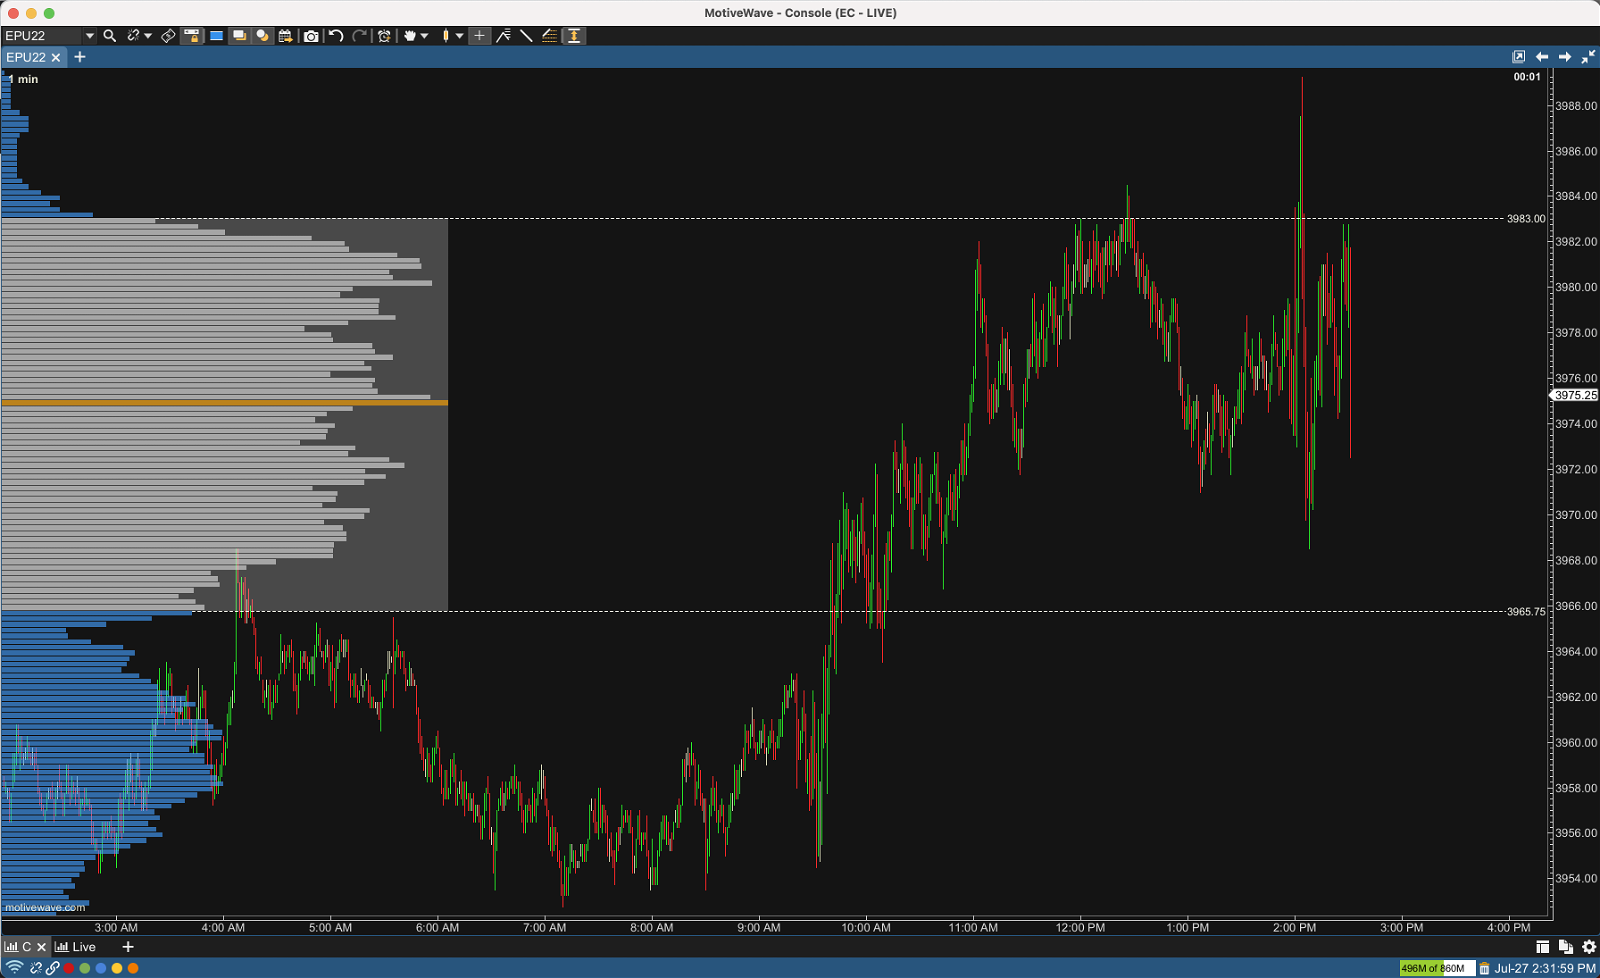 1 Minute Chart of eMini S&P 500 with Session Volume Profile